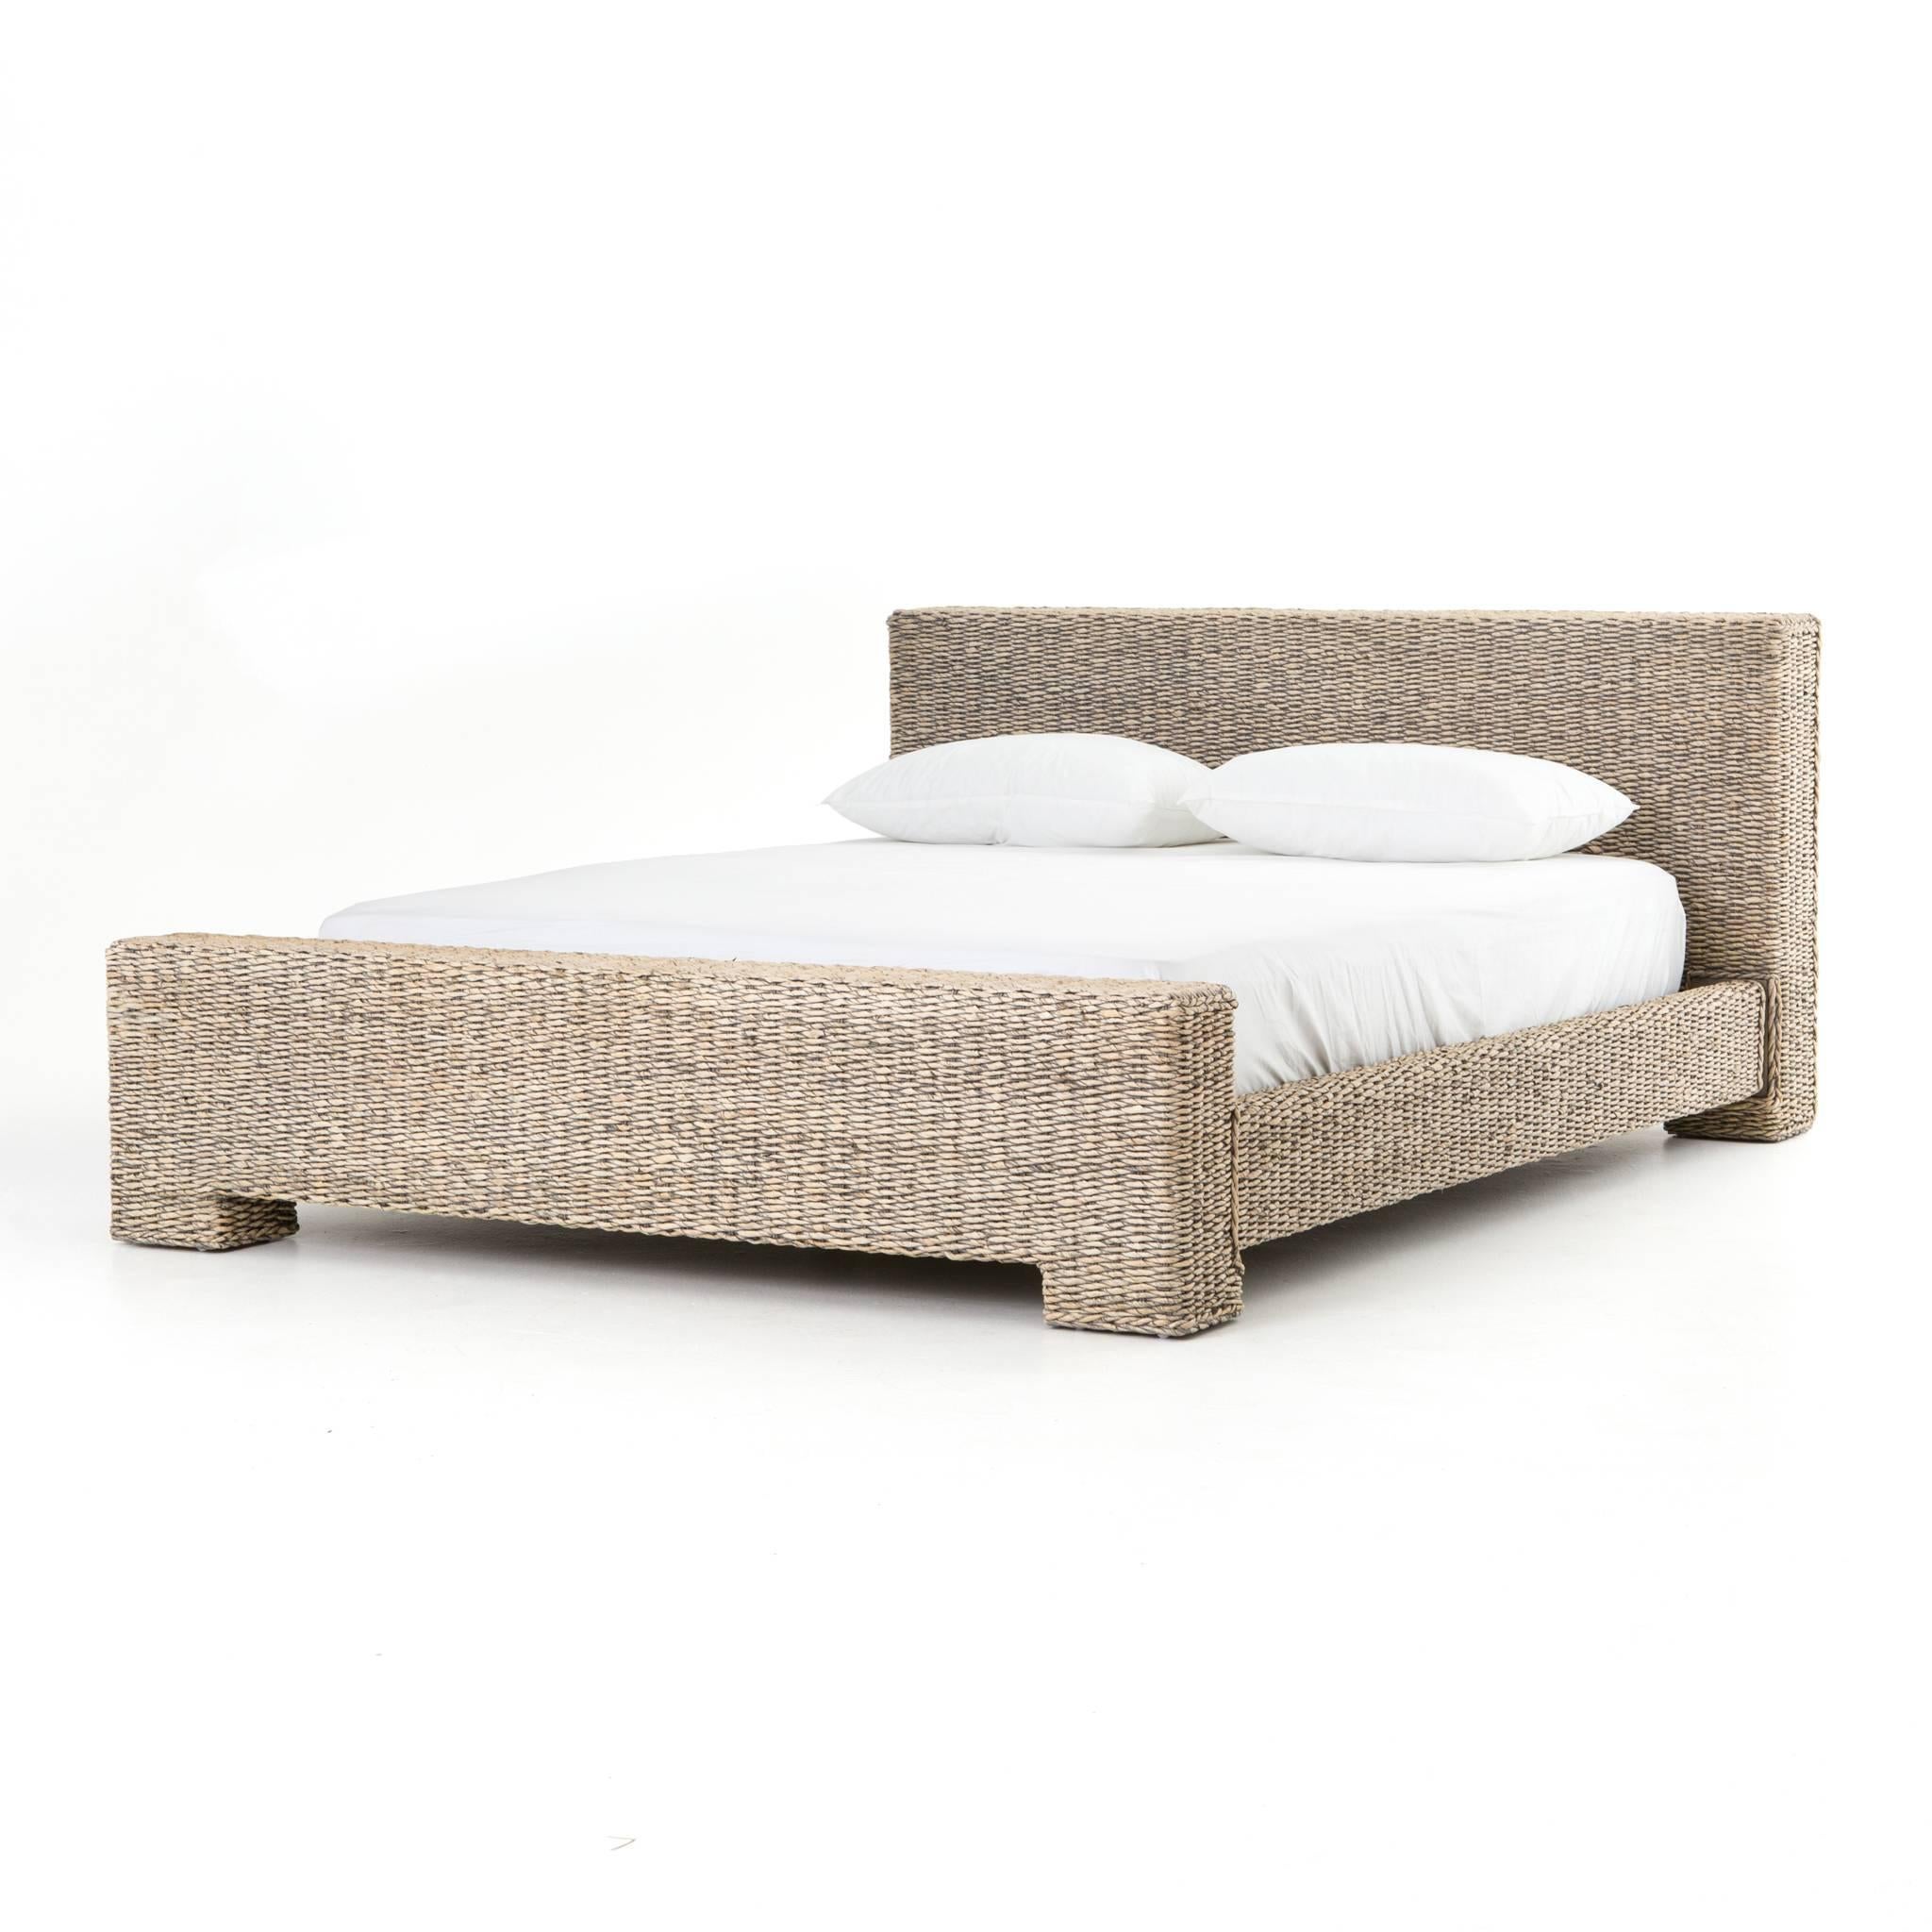 Modern, beach style rattan low profile bed, available in king and queen-size.
Queen $2588
King $3048 .W 85.5; D 97.5, H 36

Low stock, check with us for availability.